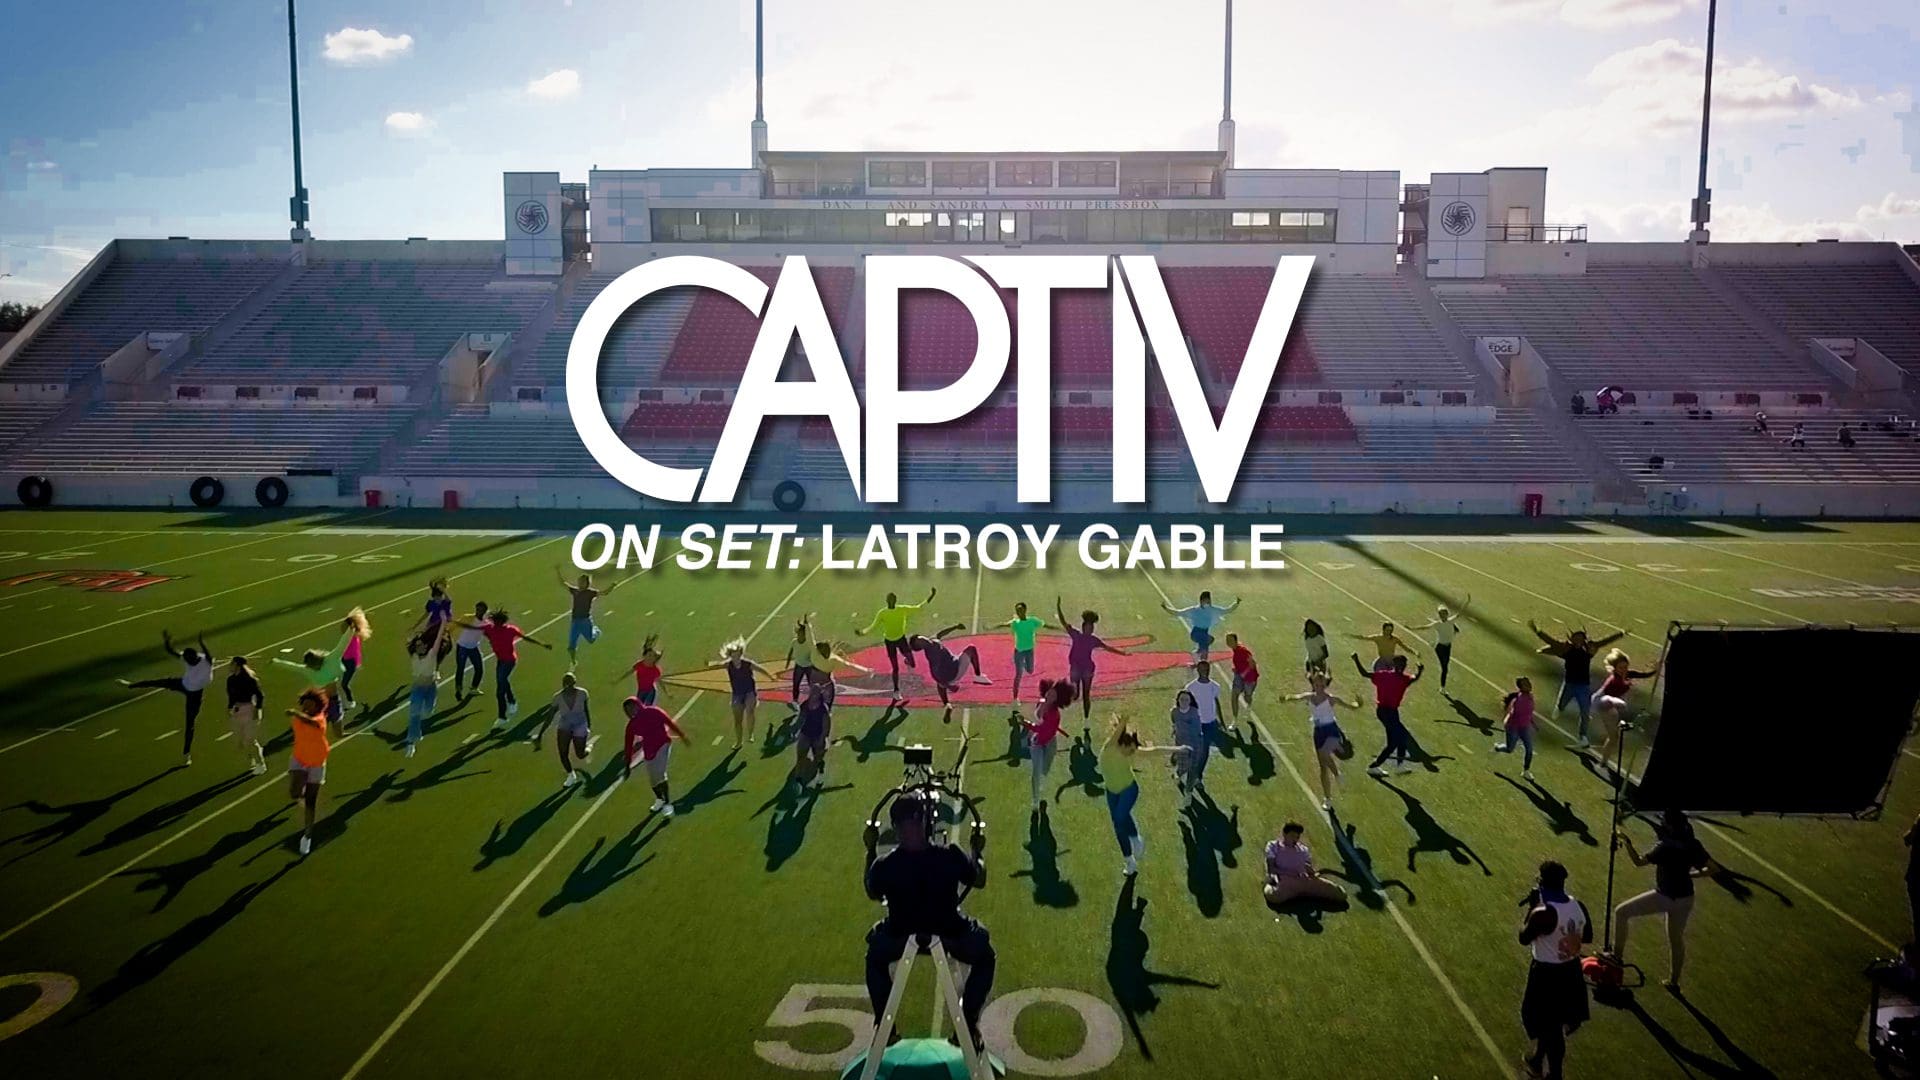 Music Video Production: LaTroy Gable “Can’t Say I’ll Stop”